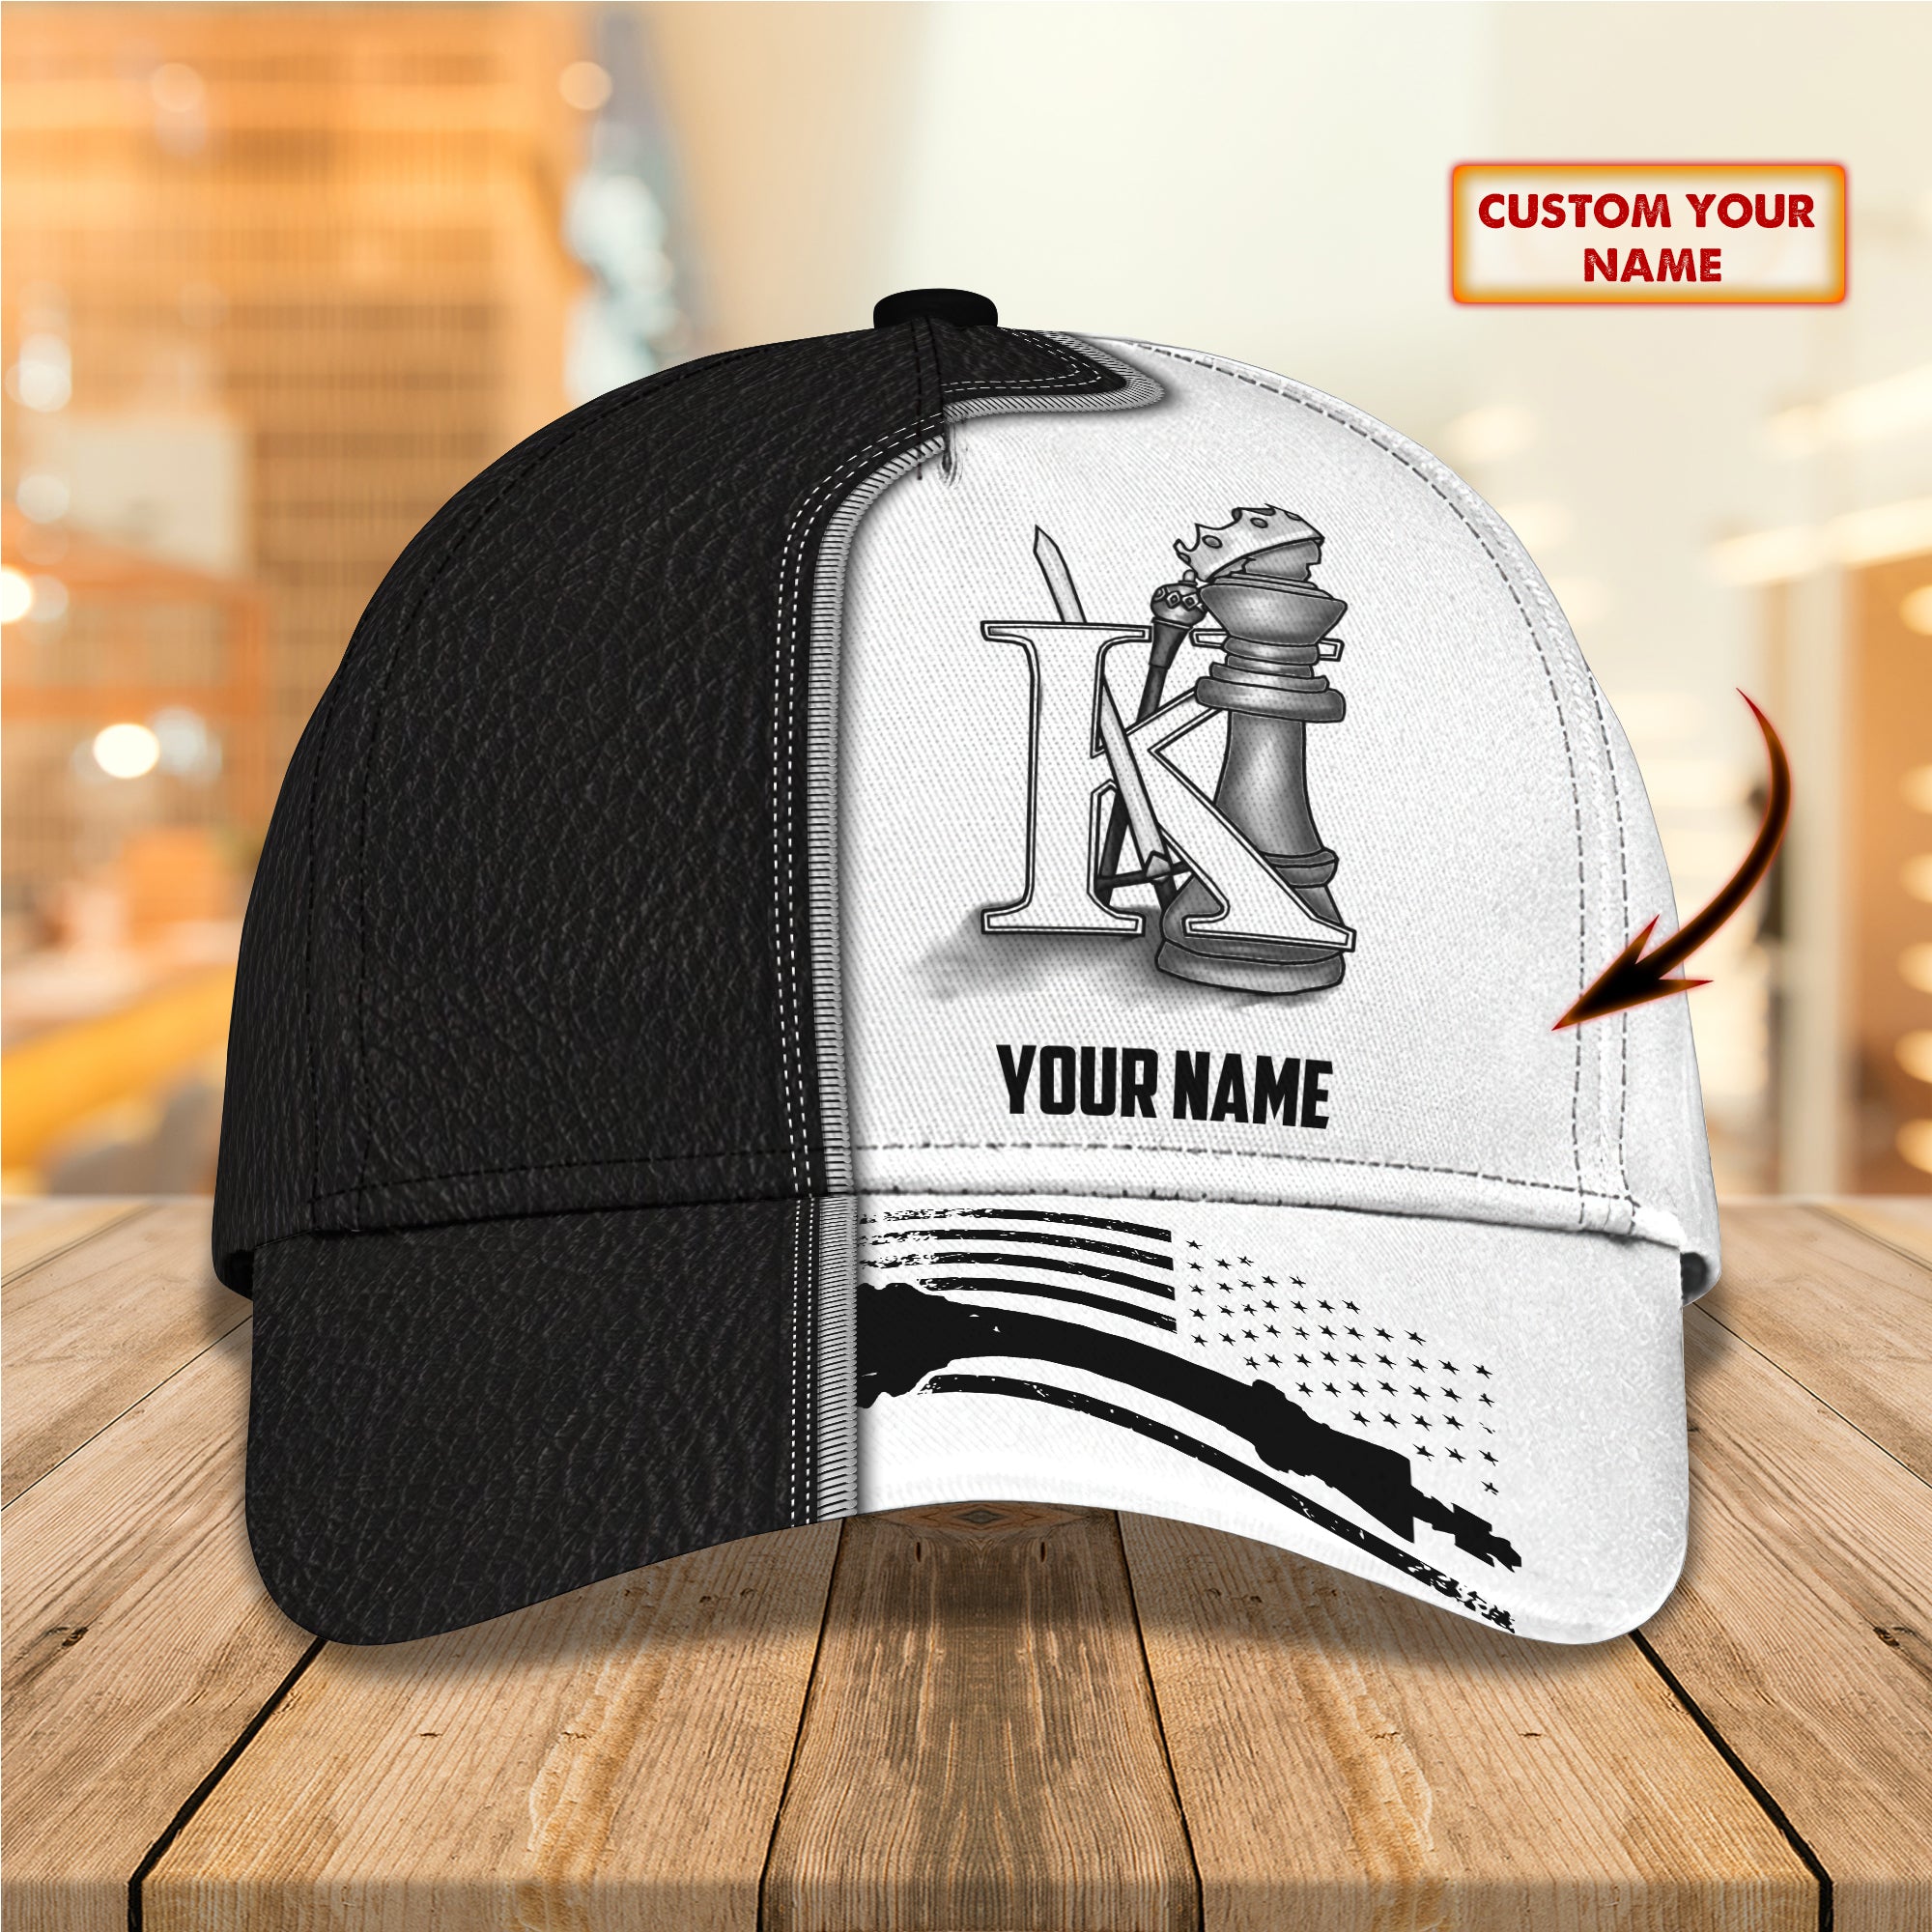 Chess- Personalize Name Cap - TD97-01